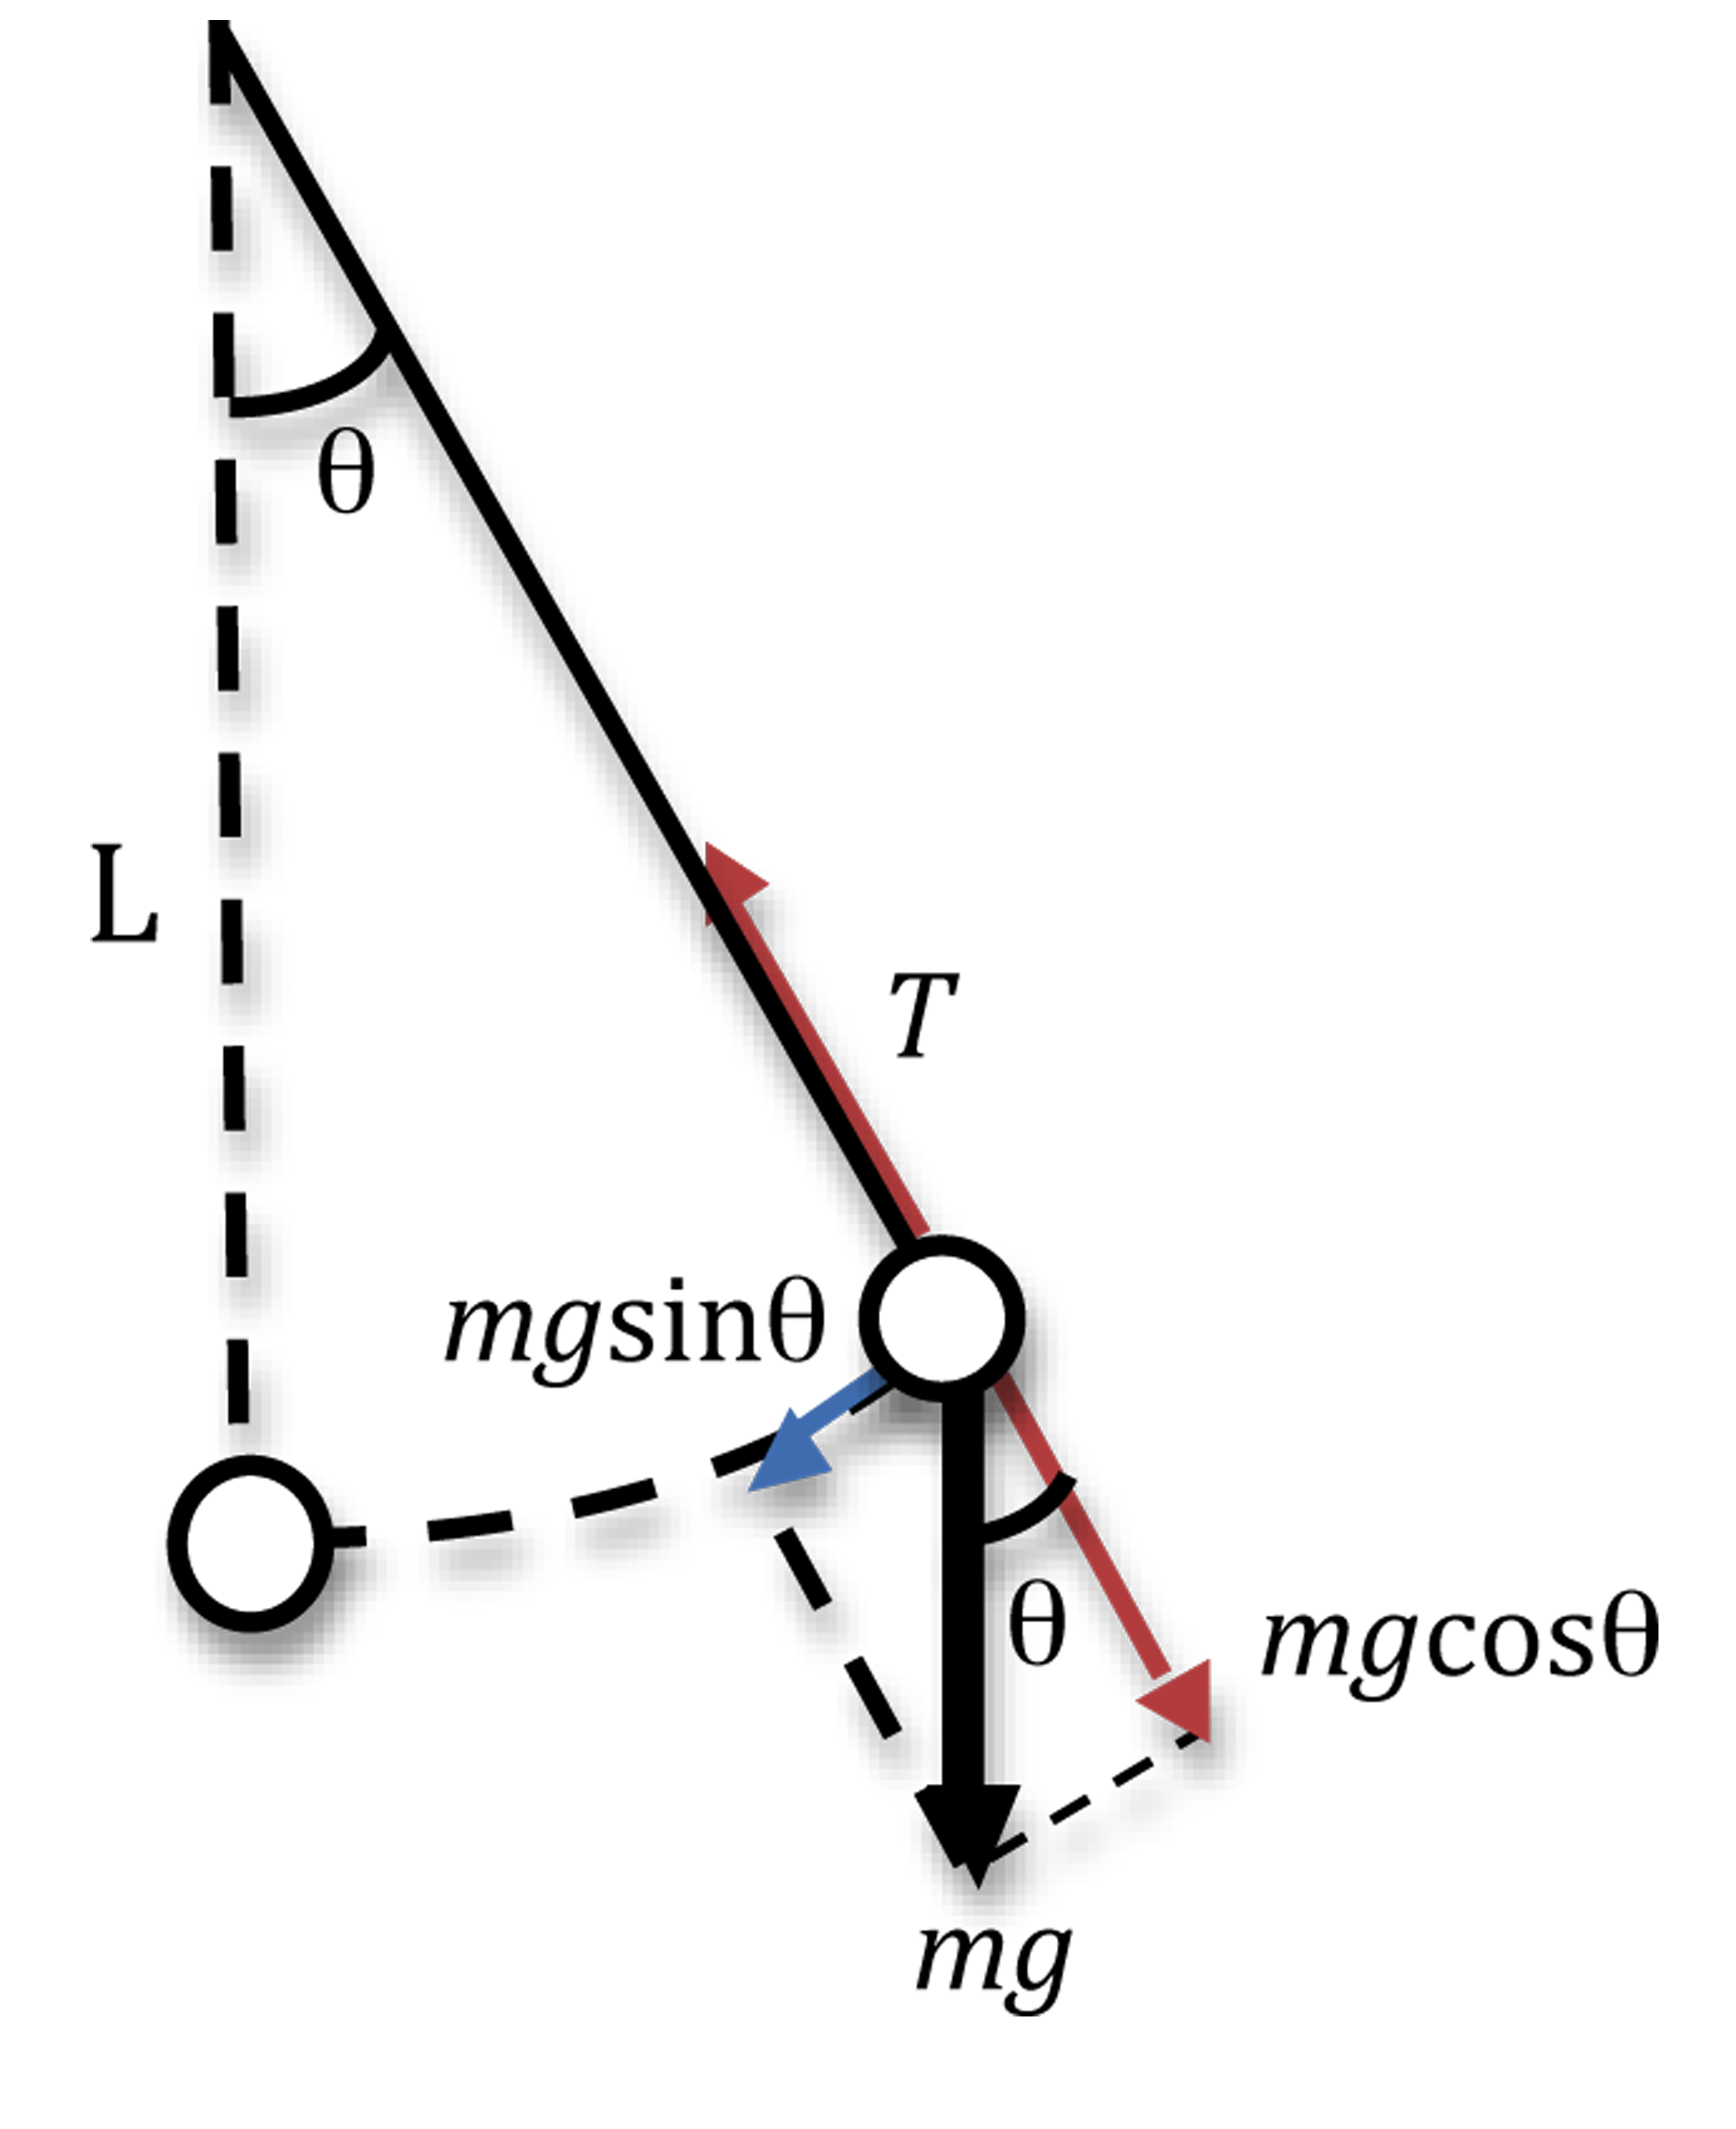 Diagram of the pendulum moving. Length of the string is denoted by L; the angle of the string's displacement is noted by theta. The vector towards the stand is given by T; vector away from the stand is given by mg cosine theta; the vector down is labeled mg; the vector towards the pendulum's original location is mg sine theta. The between mg and mg cosine theta is labeled as theta.